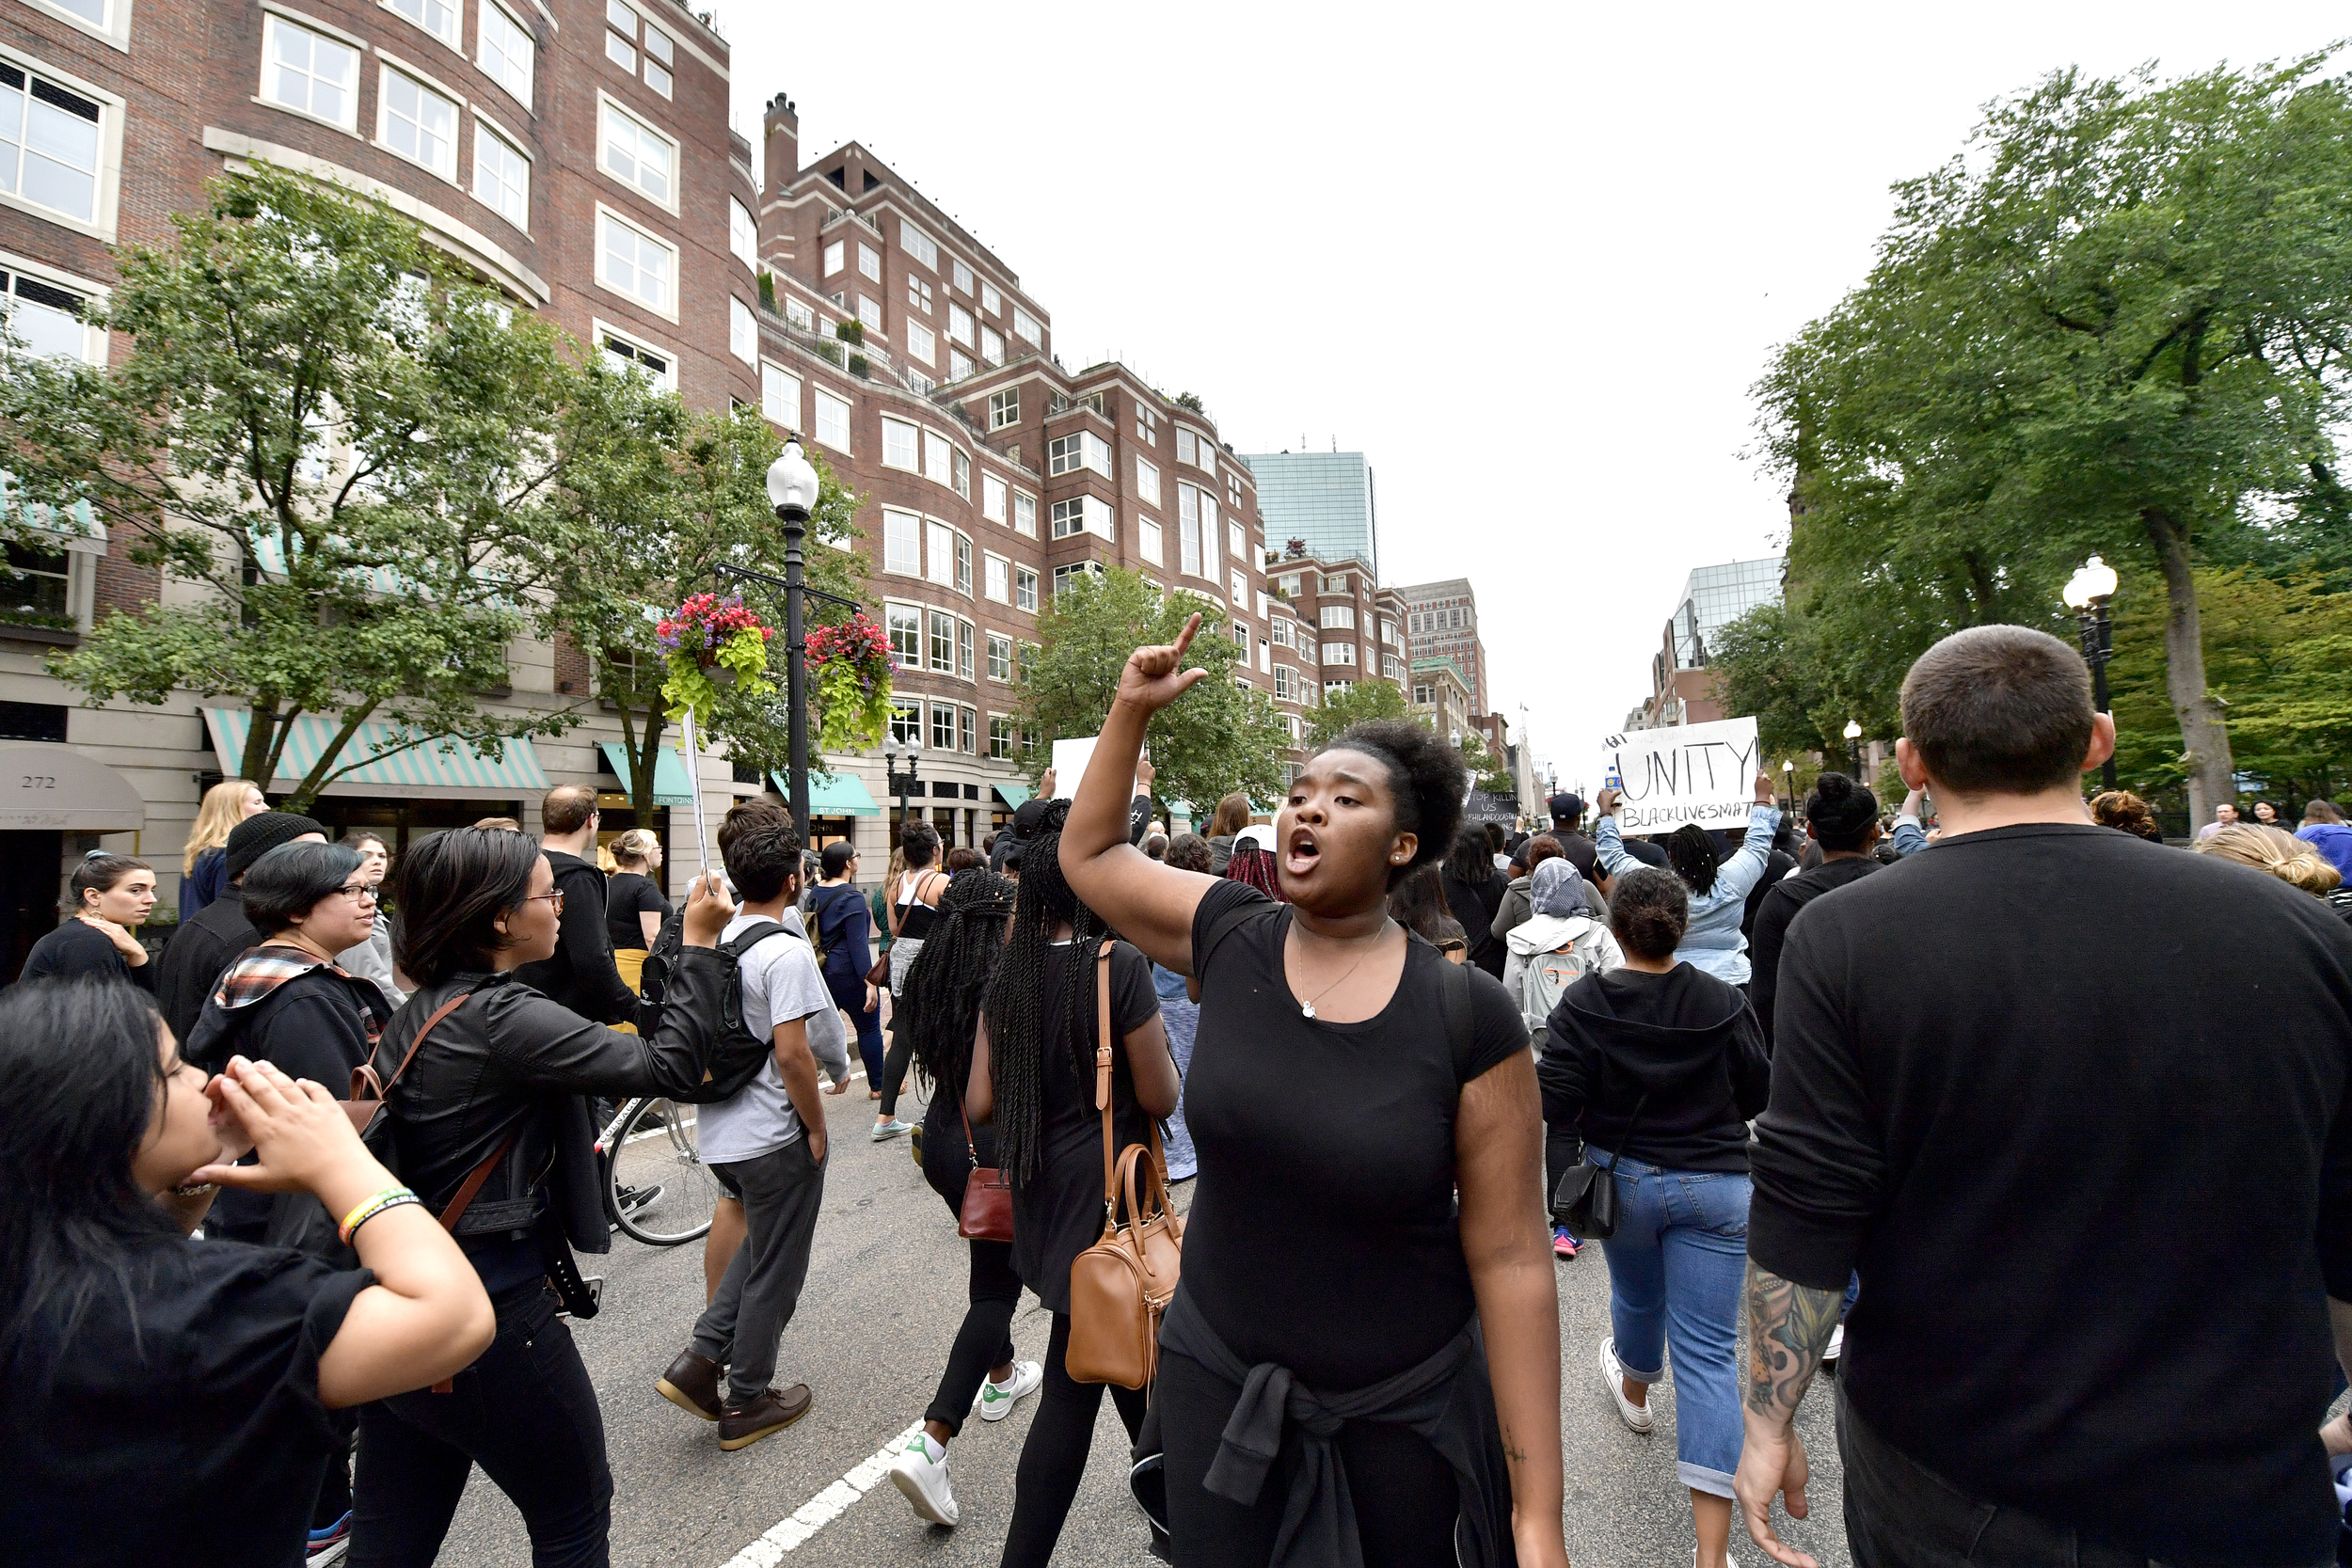  BOSTON, MA, July 10, 2016: Several hundred Black Lives Matter protestors gathered to march in downtown Boston from Downtown Crossing to Dudley Square on July 10, 2016. Boston Police guided them through the streets of Boston and the protest took plac